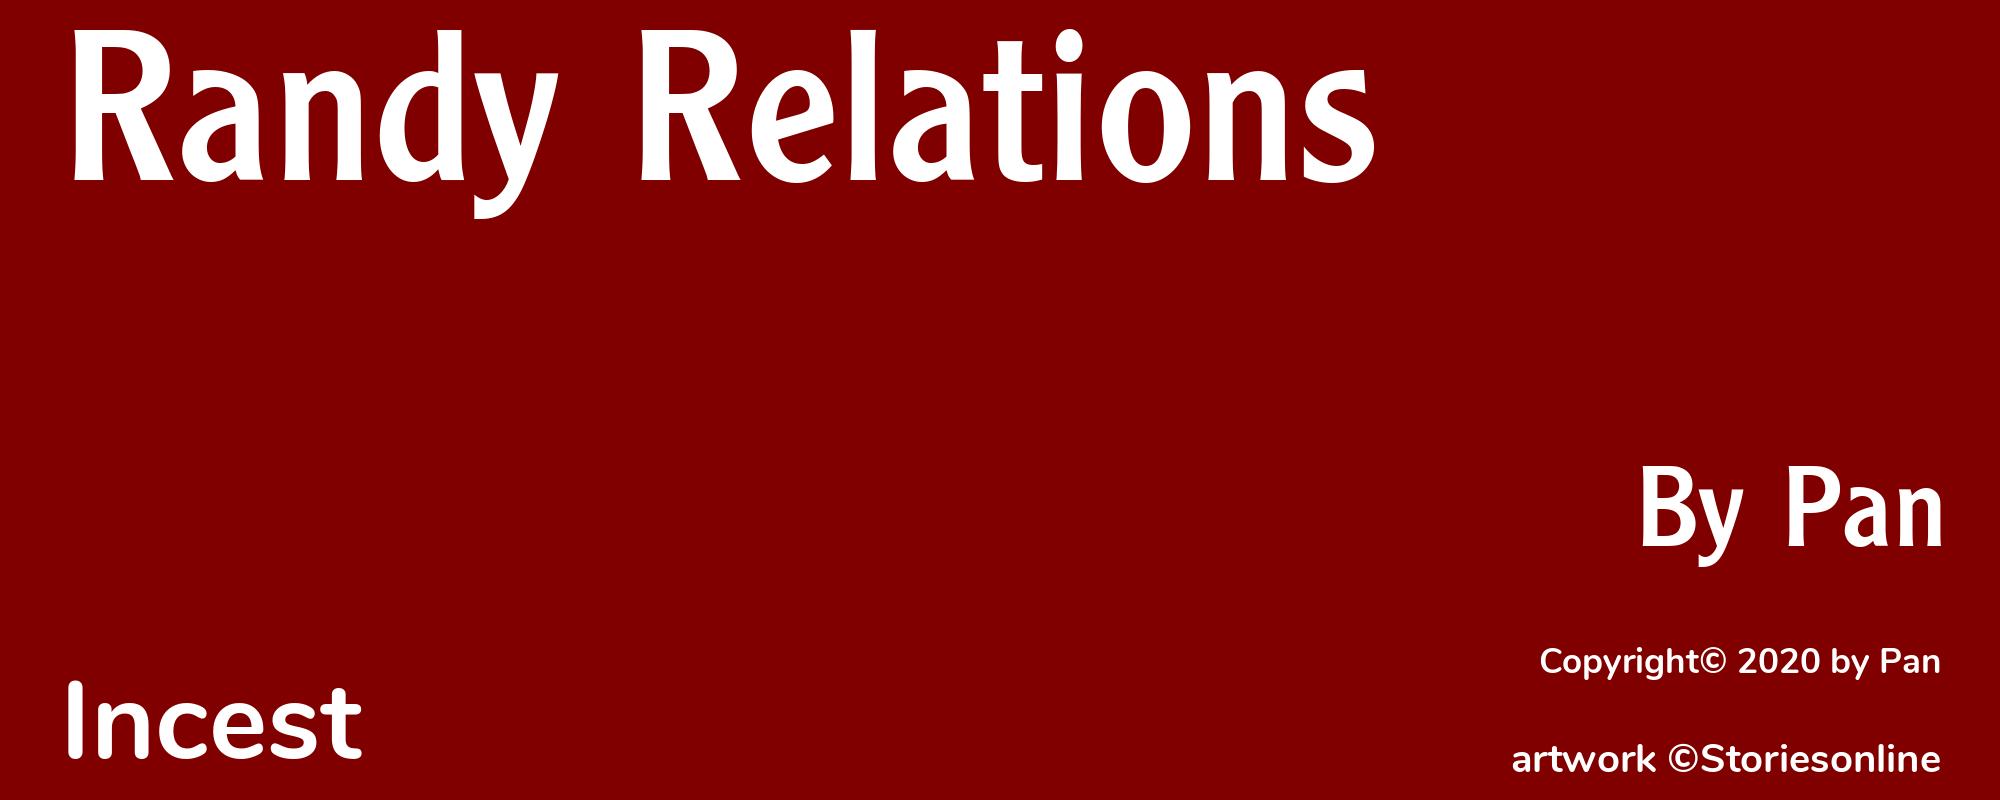 Randy Relations - Cover